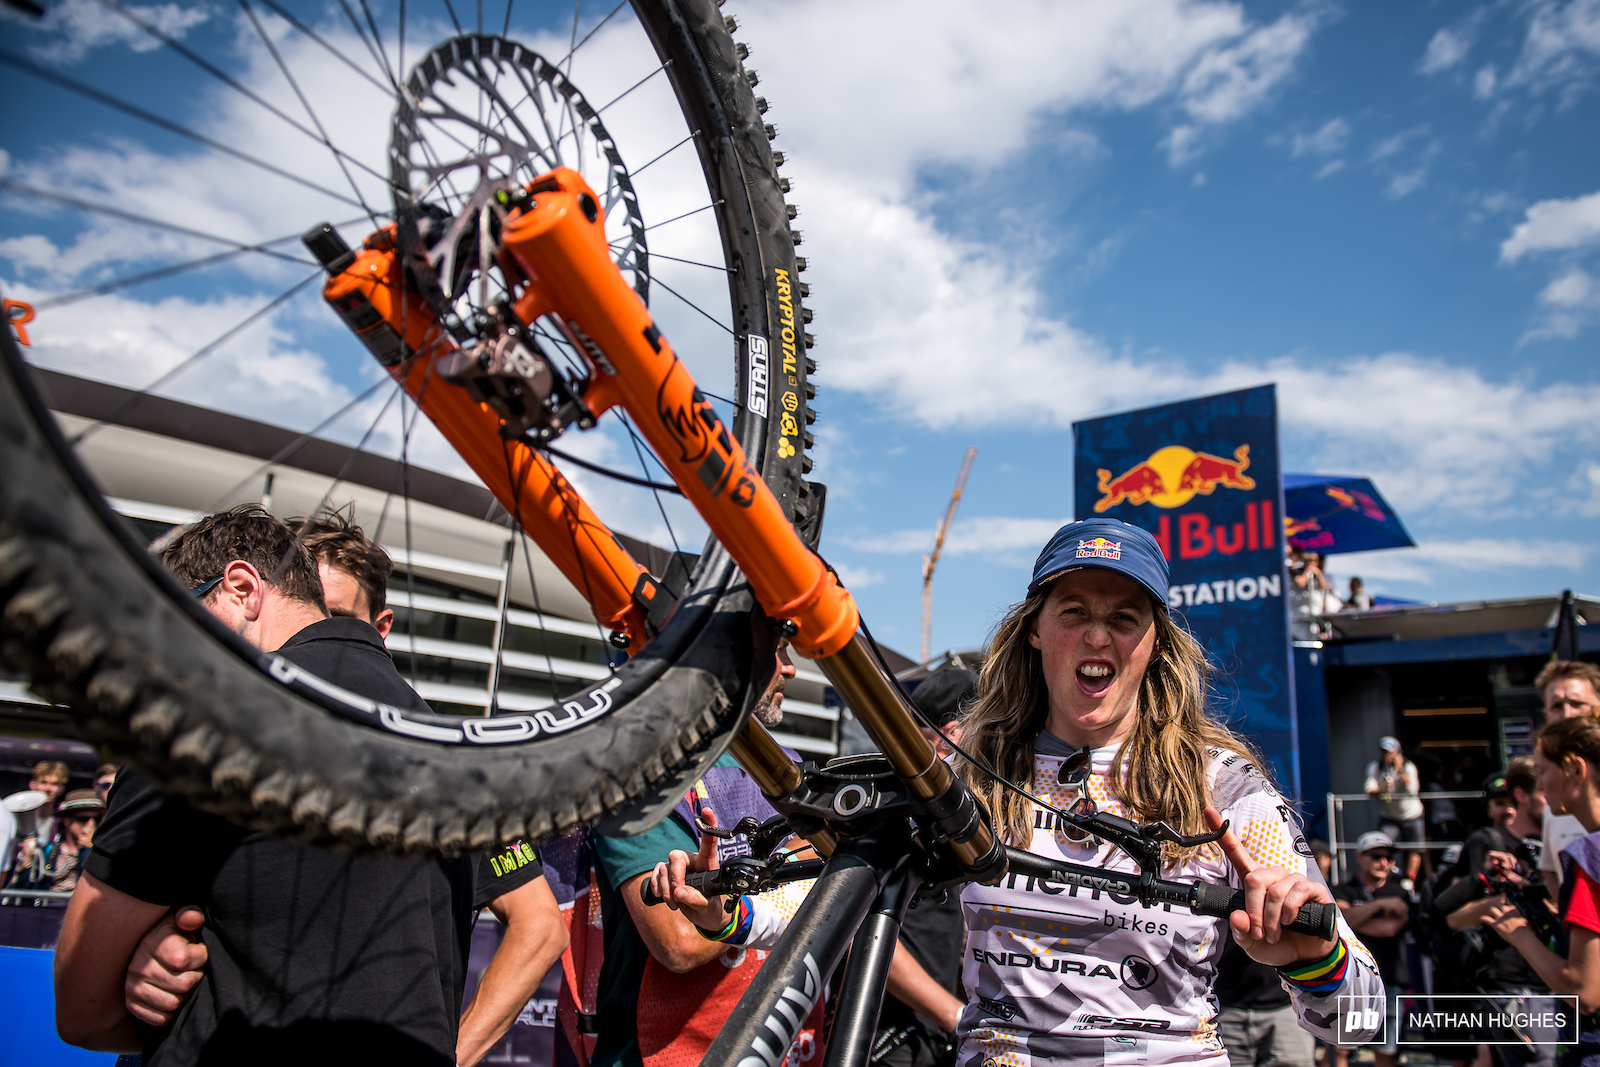 Rachel Atherton finds Andi s bike in the crowd.